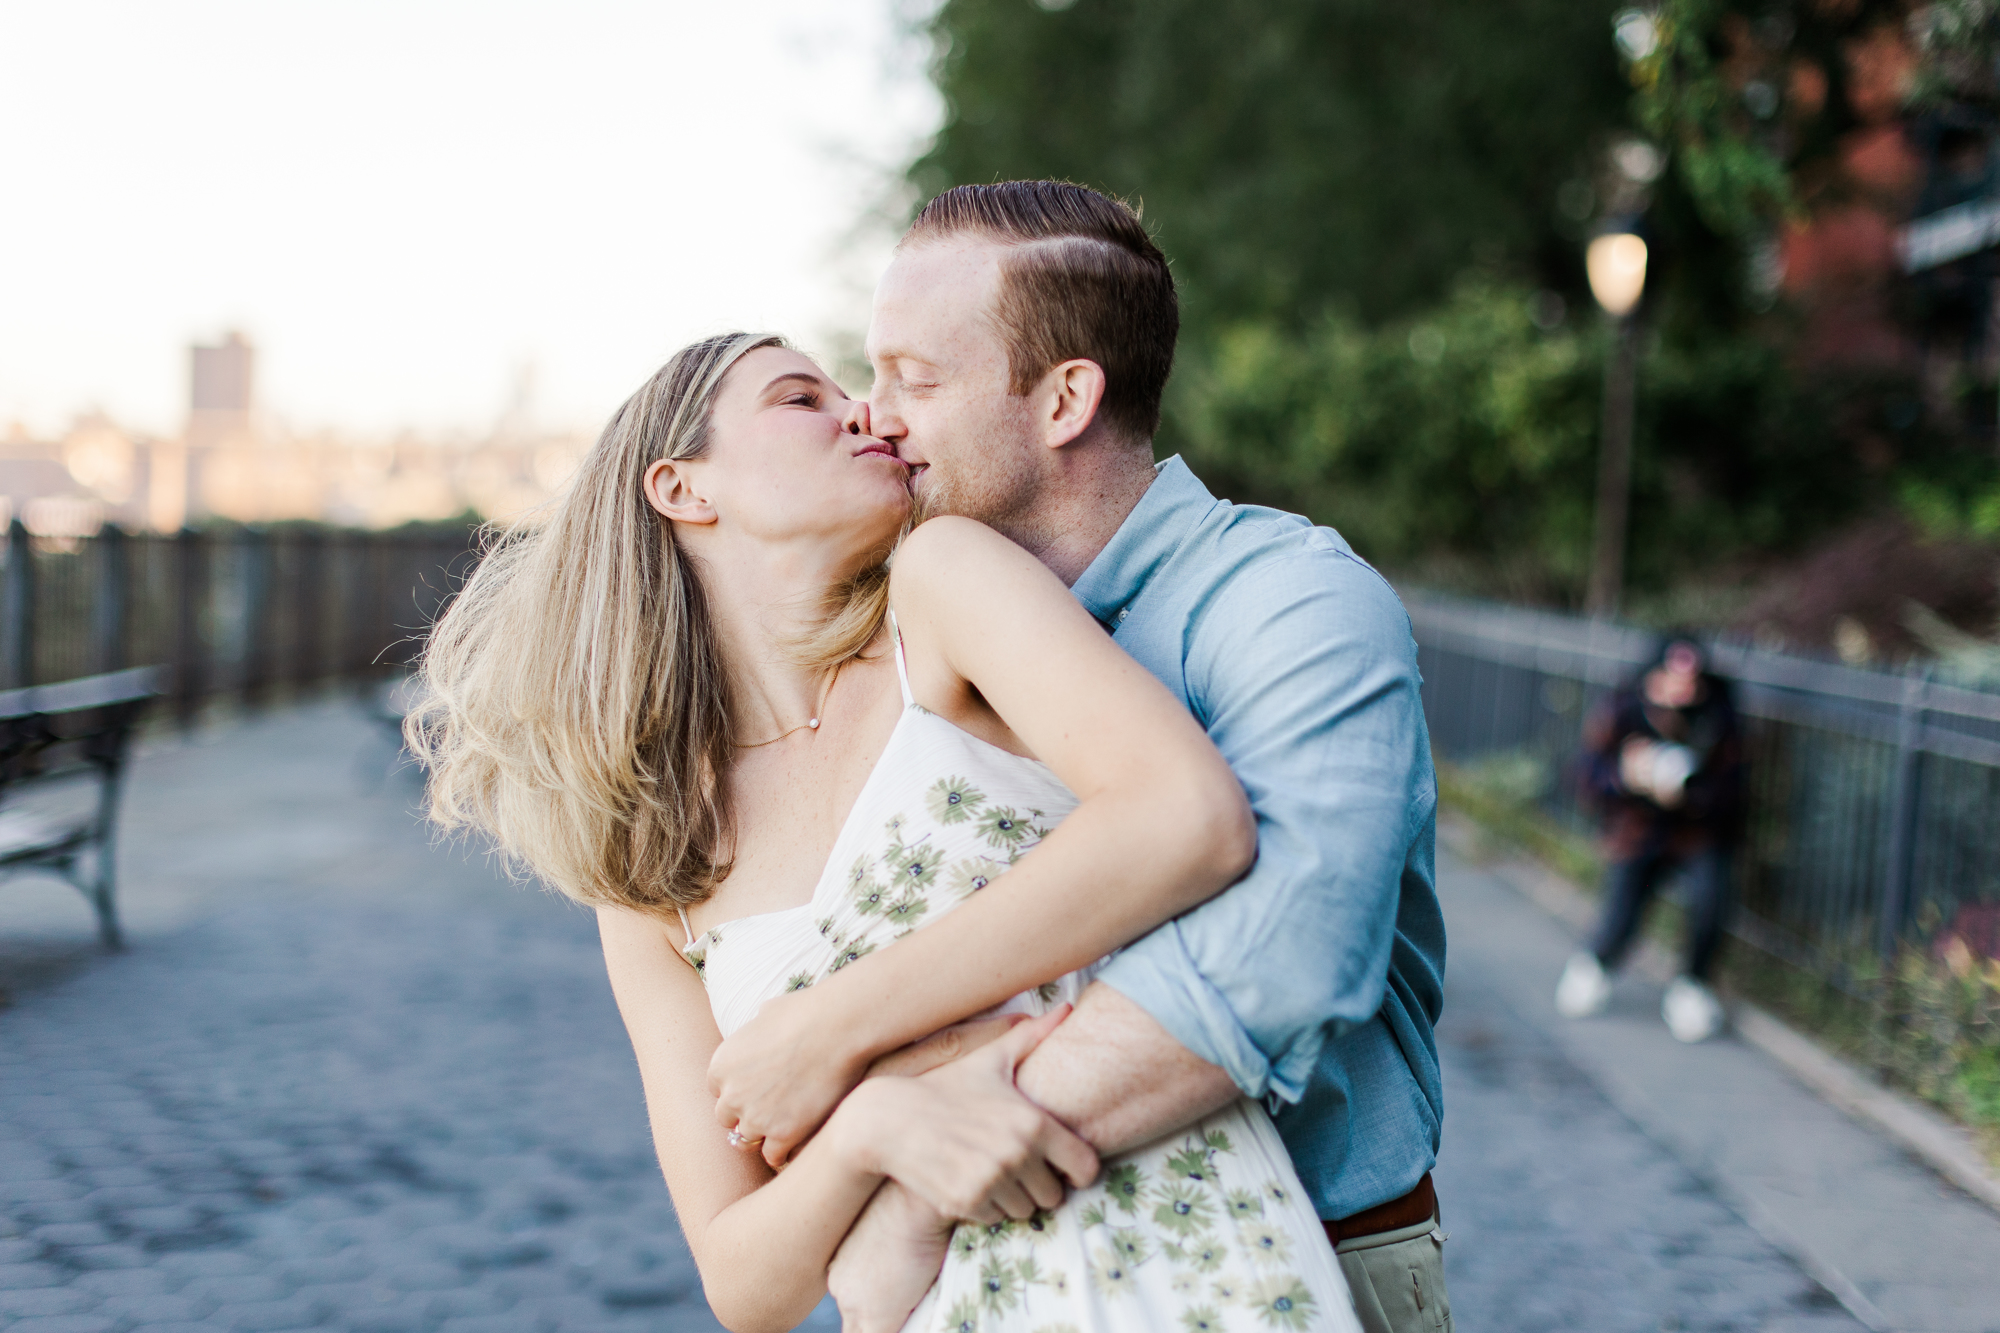 Cheerful Engagement Photos In Brooklyn Heights